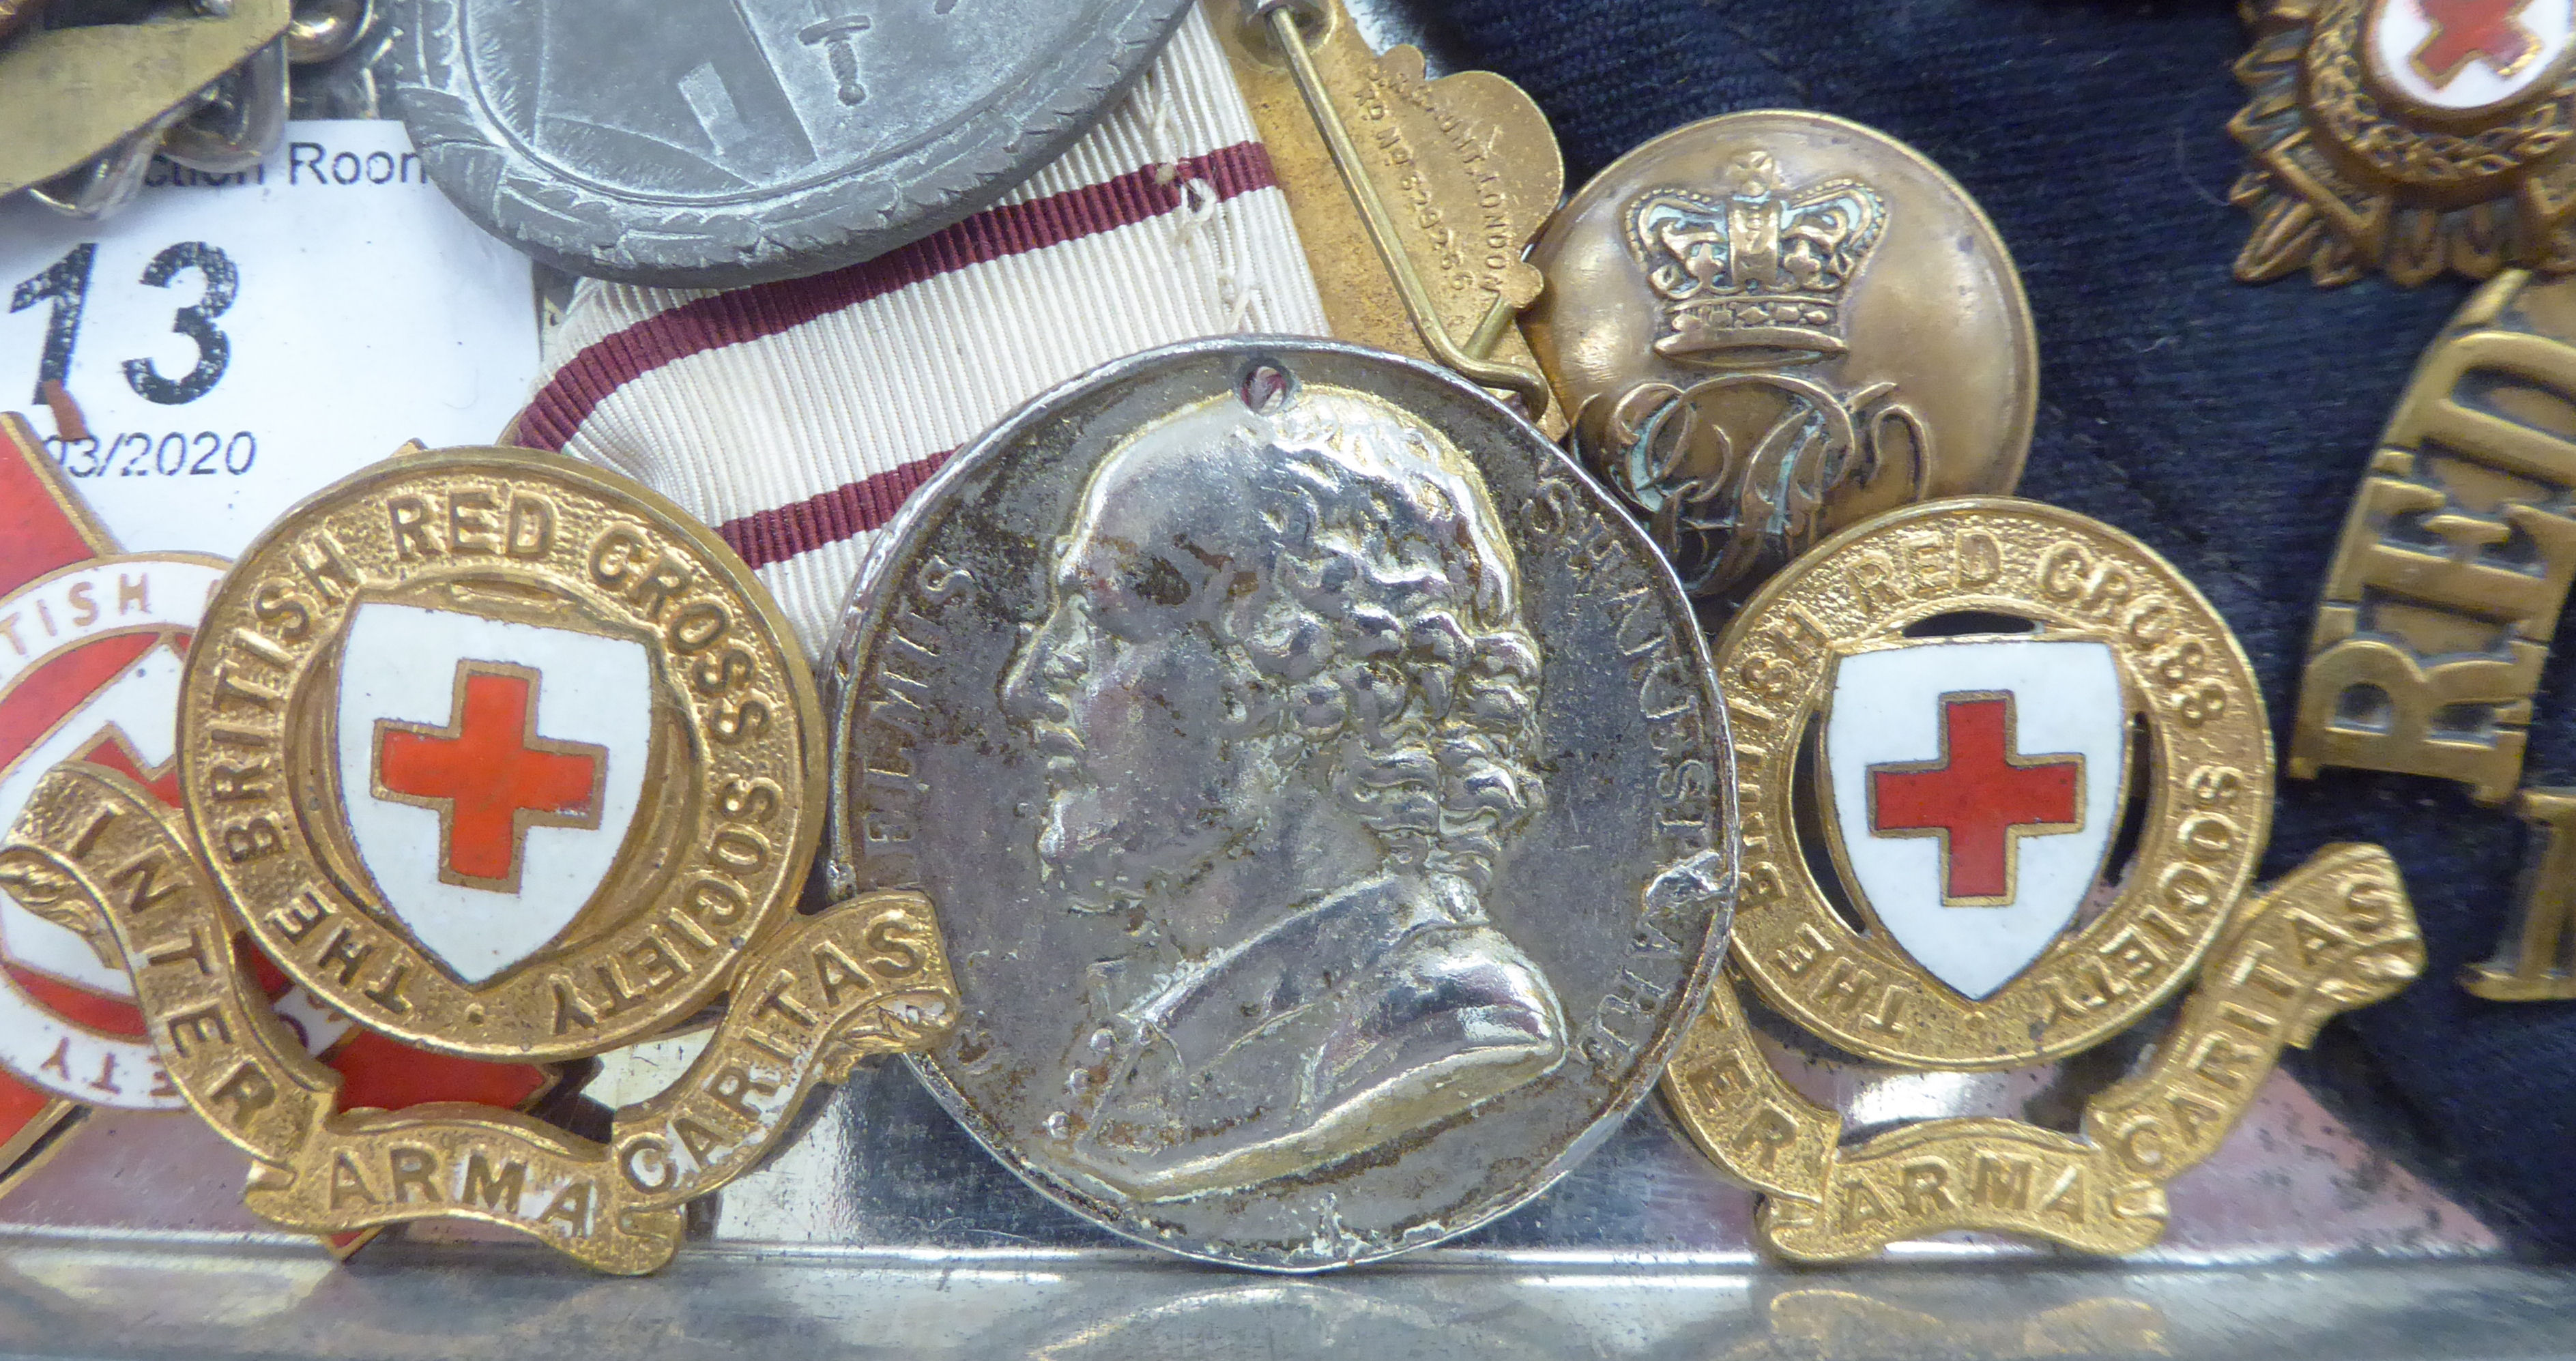 Uncollated German and other military insignia: to include a British Red Cross enamelled badge - Image 3 of 5